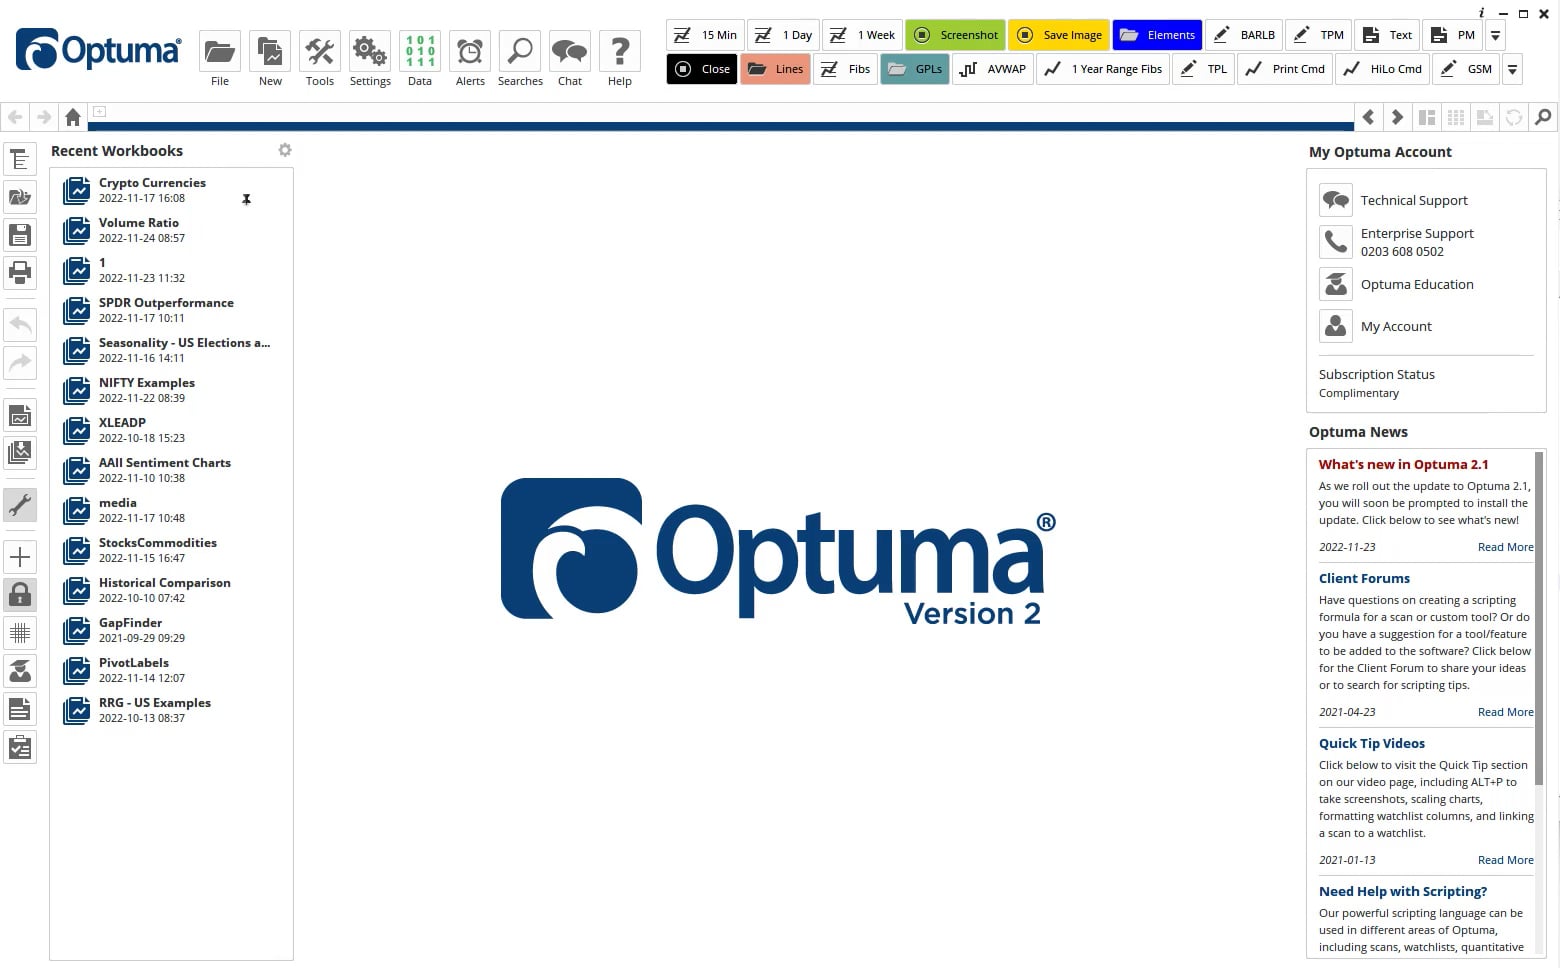 What’s New in Optuma 2.1